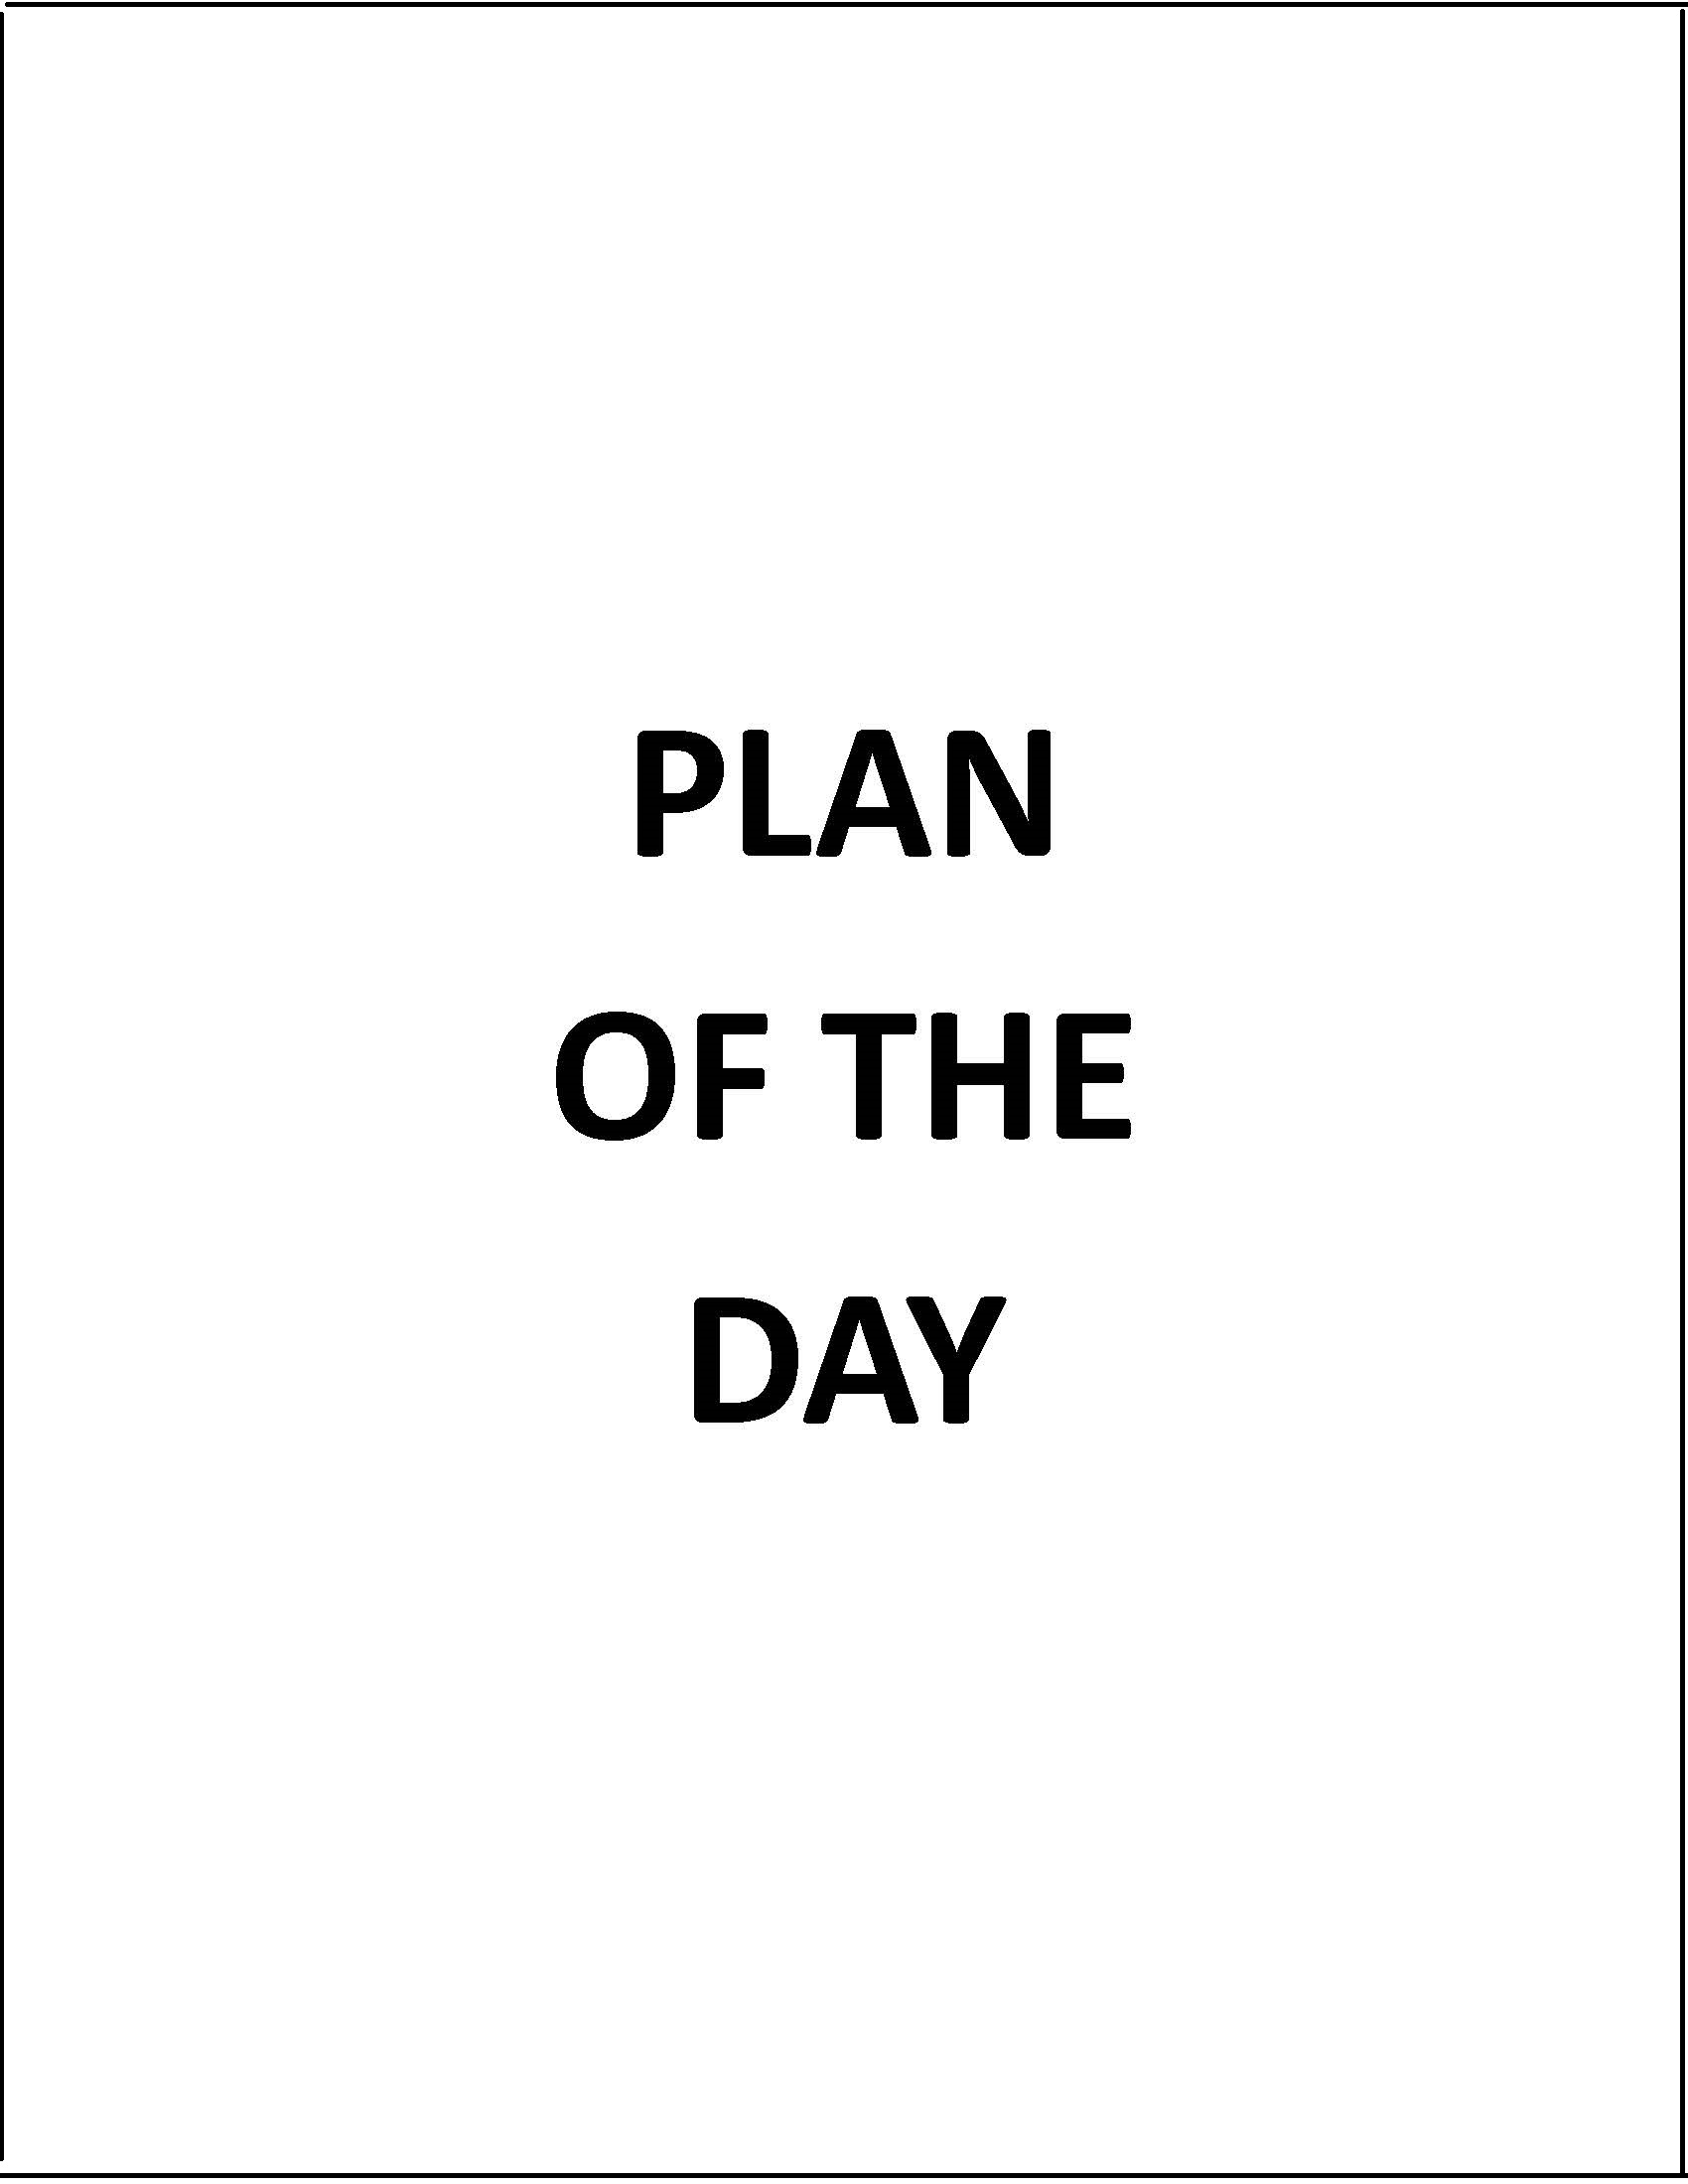 View the Plan of the Day